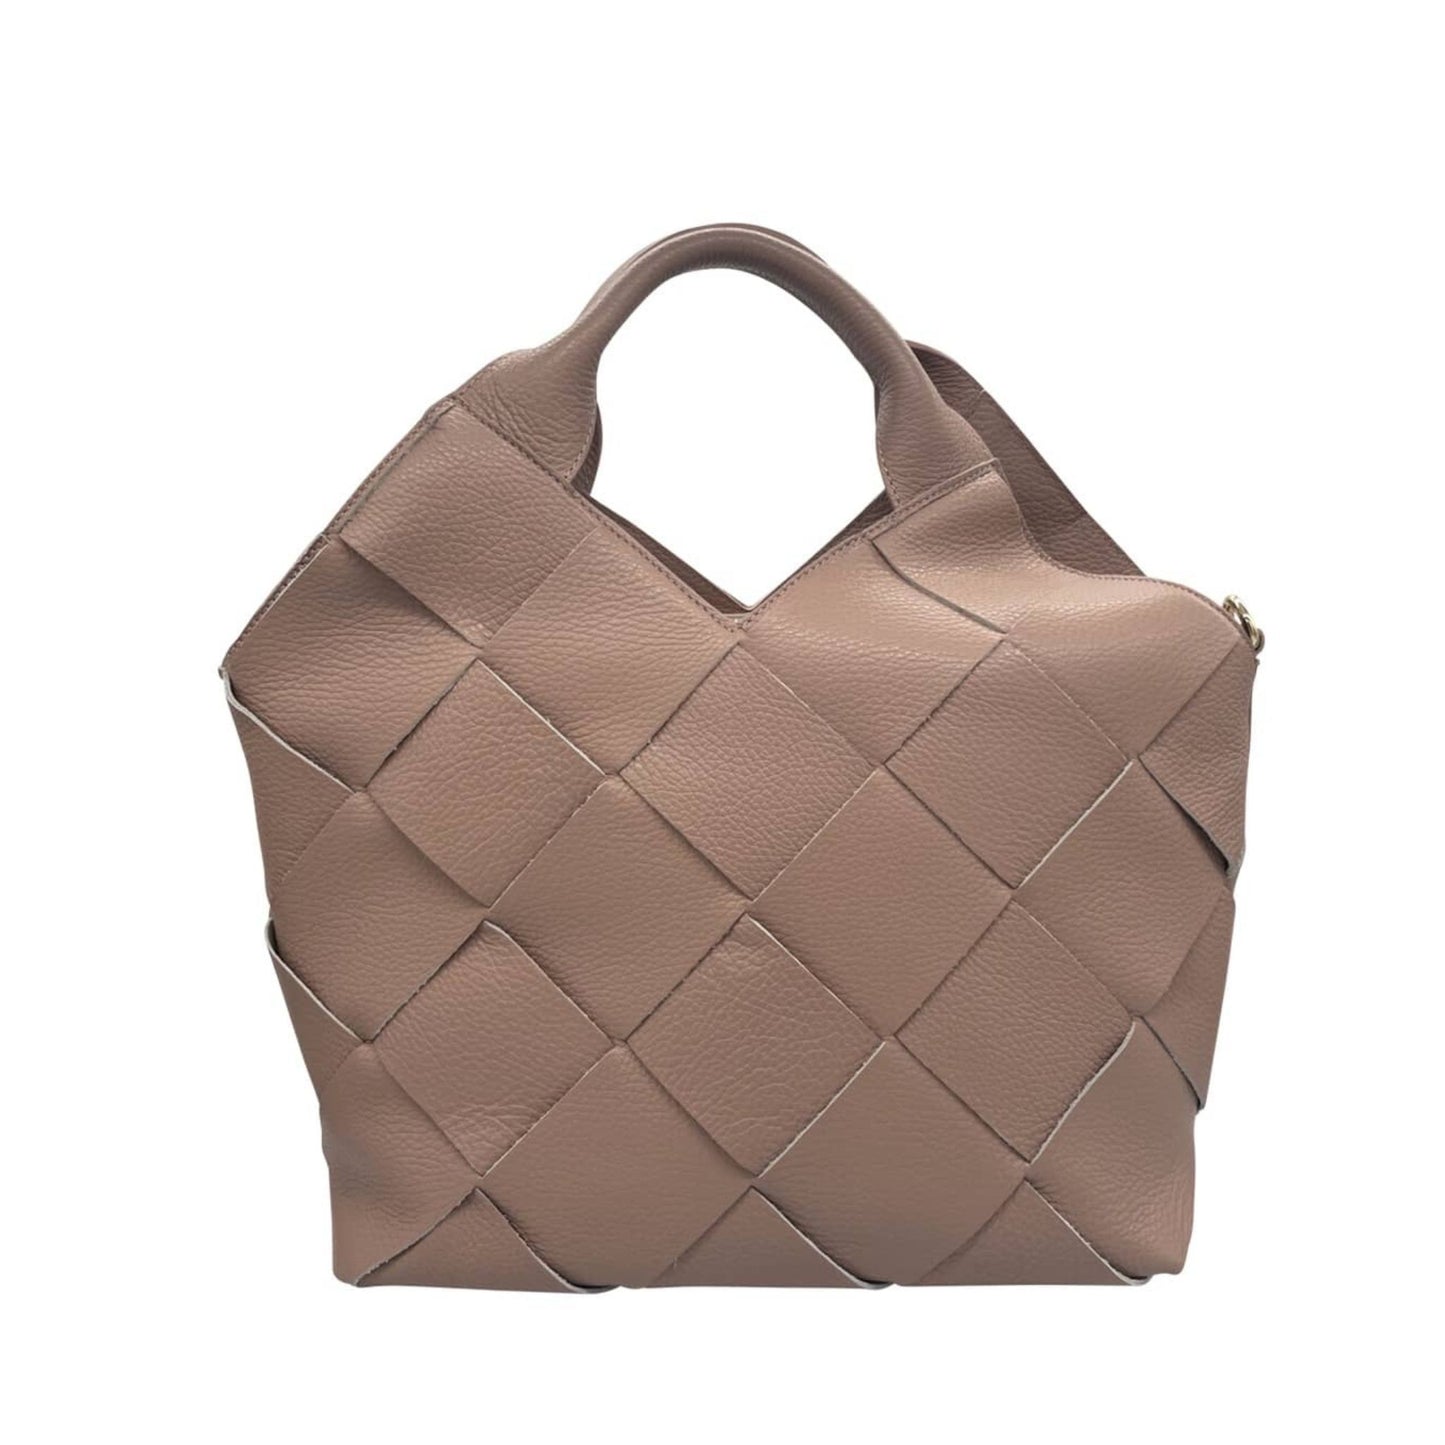 The Woven Leather Basket Tote